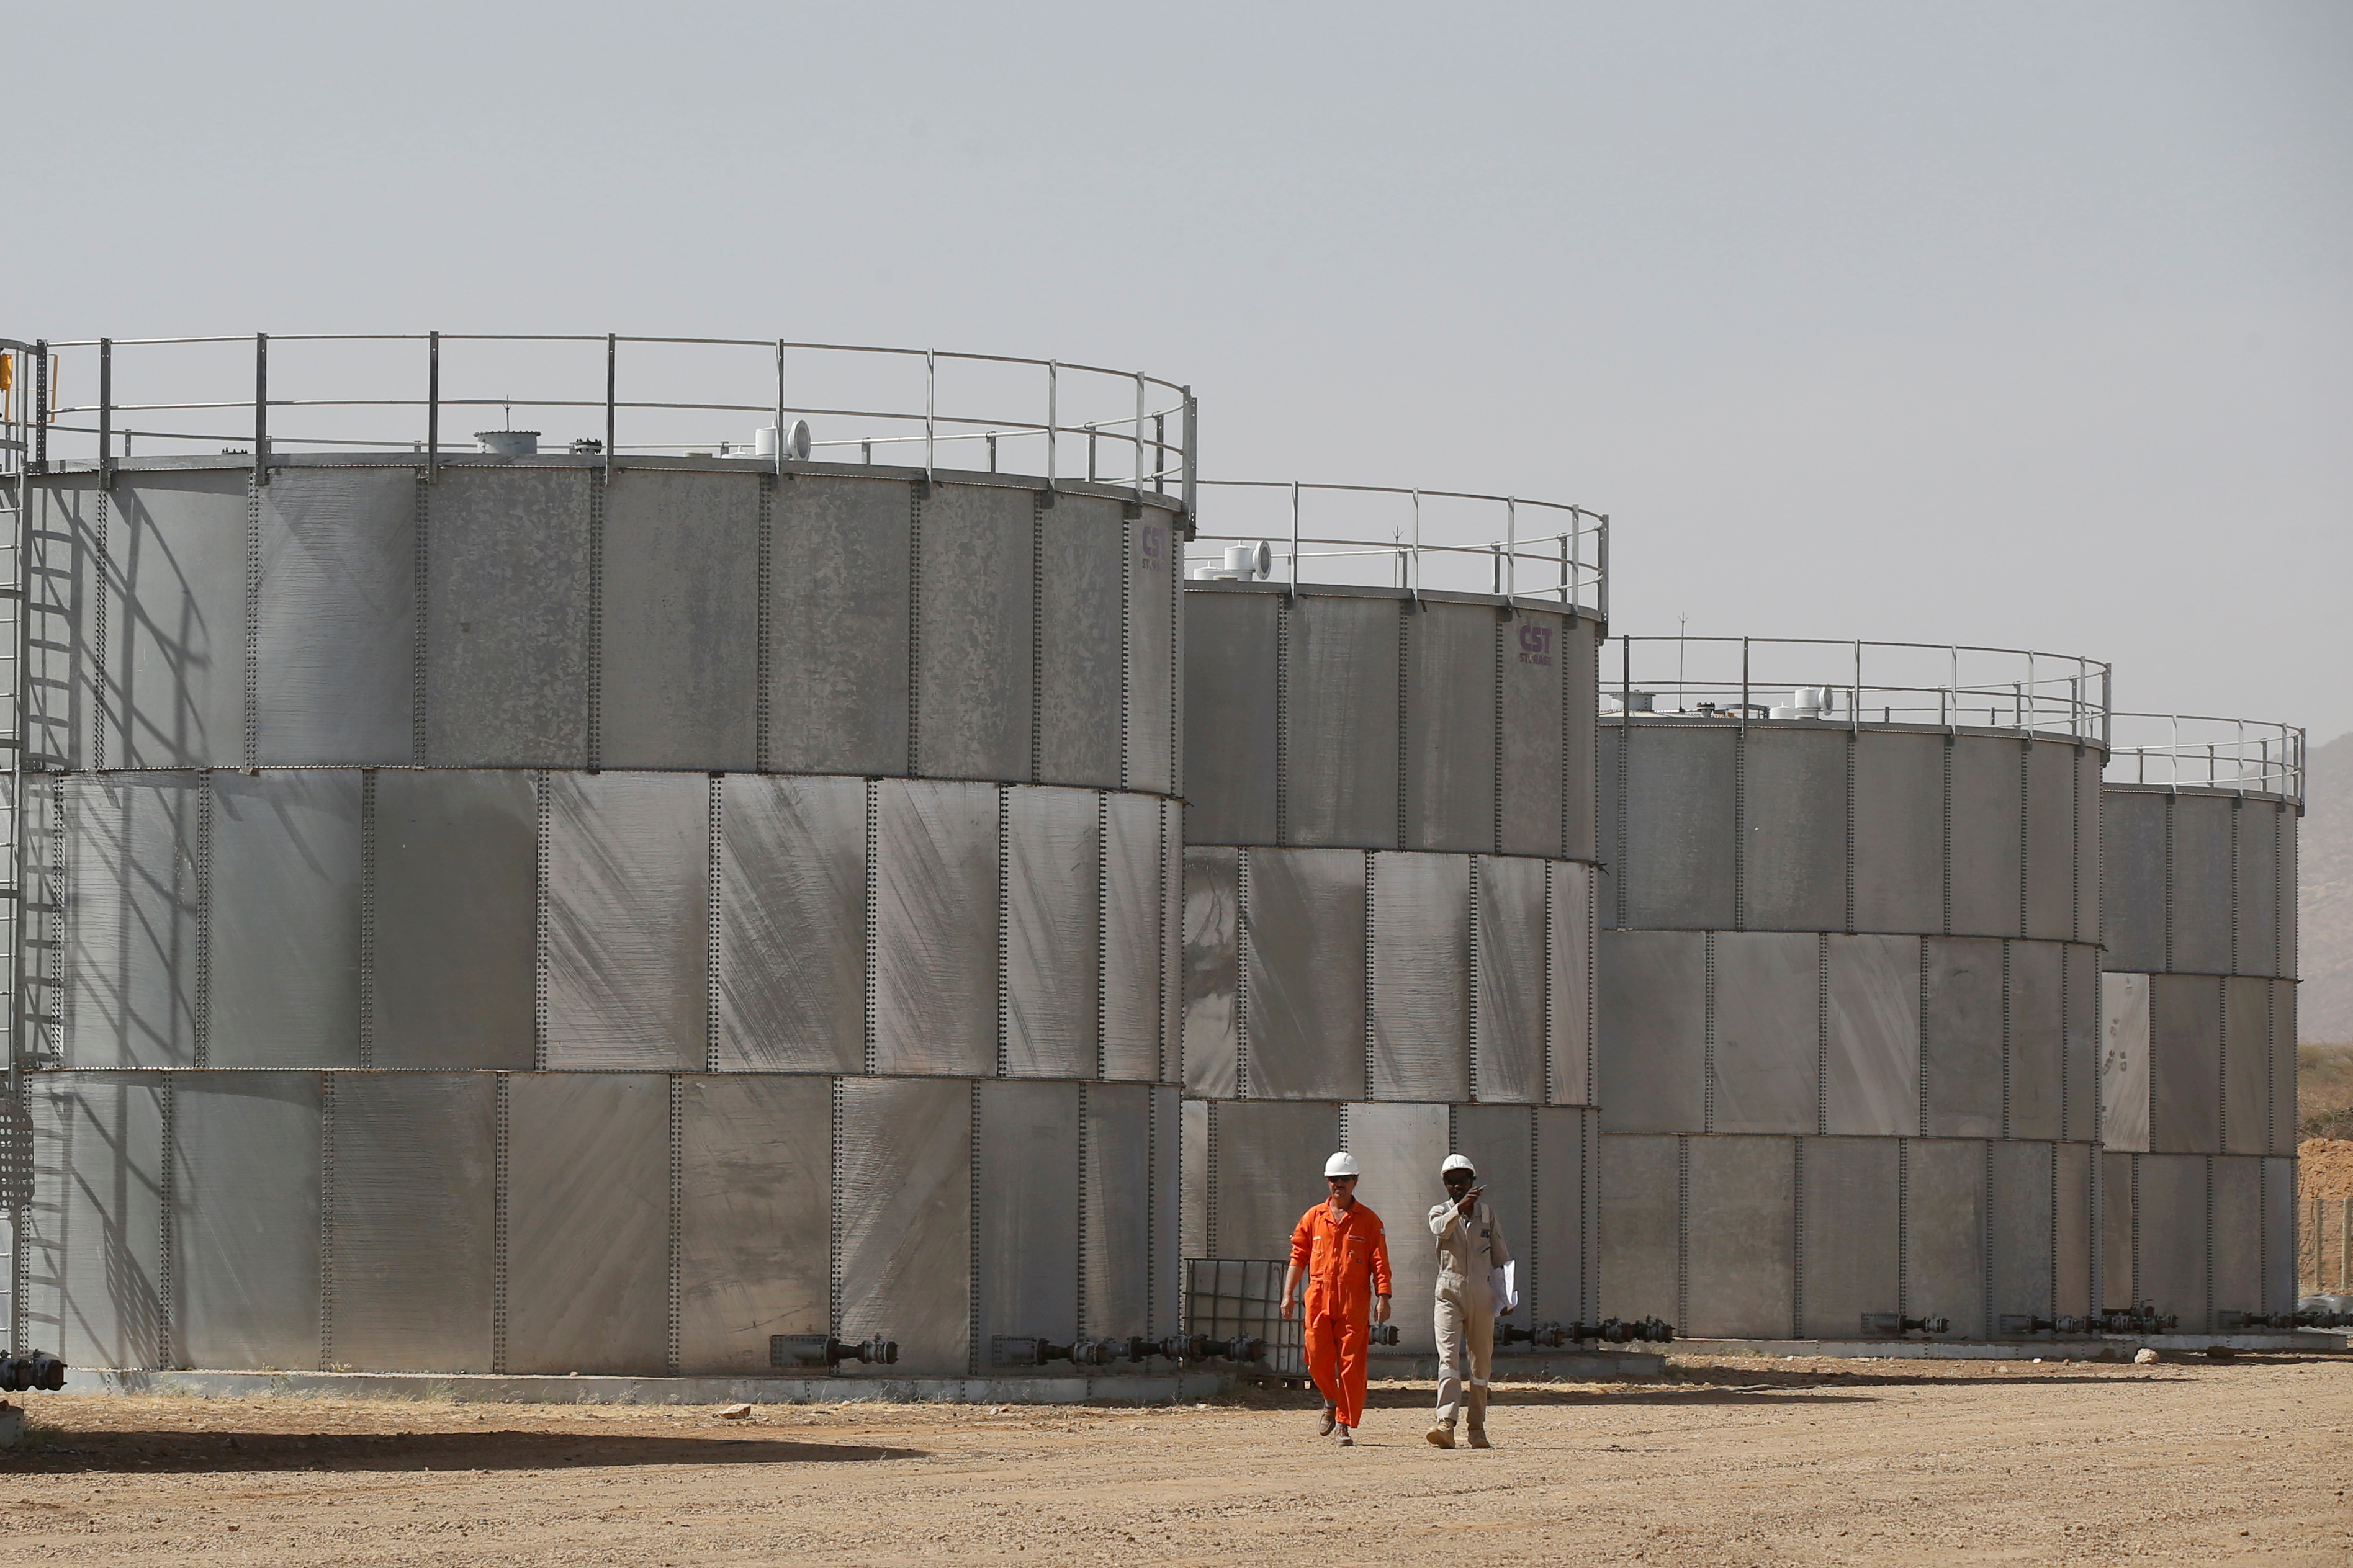 Workers walk past storage tanks at Tullow Oil's Ngamia 8 drilling site in Lokichar